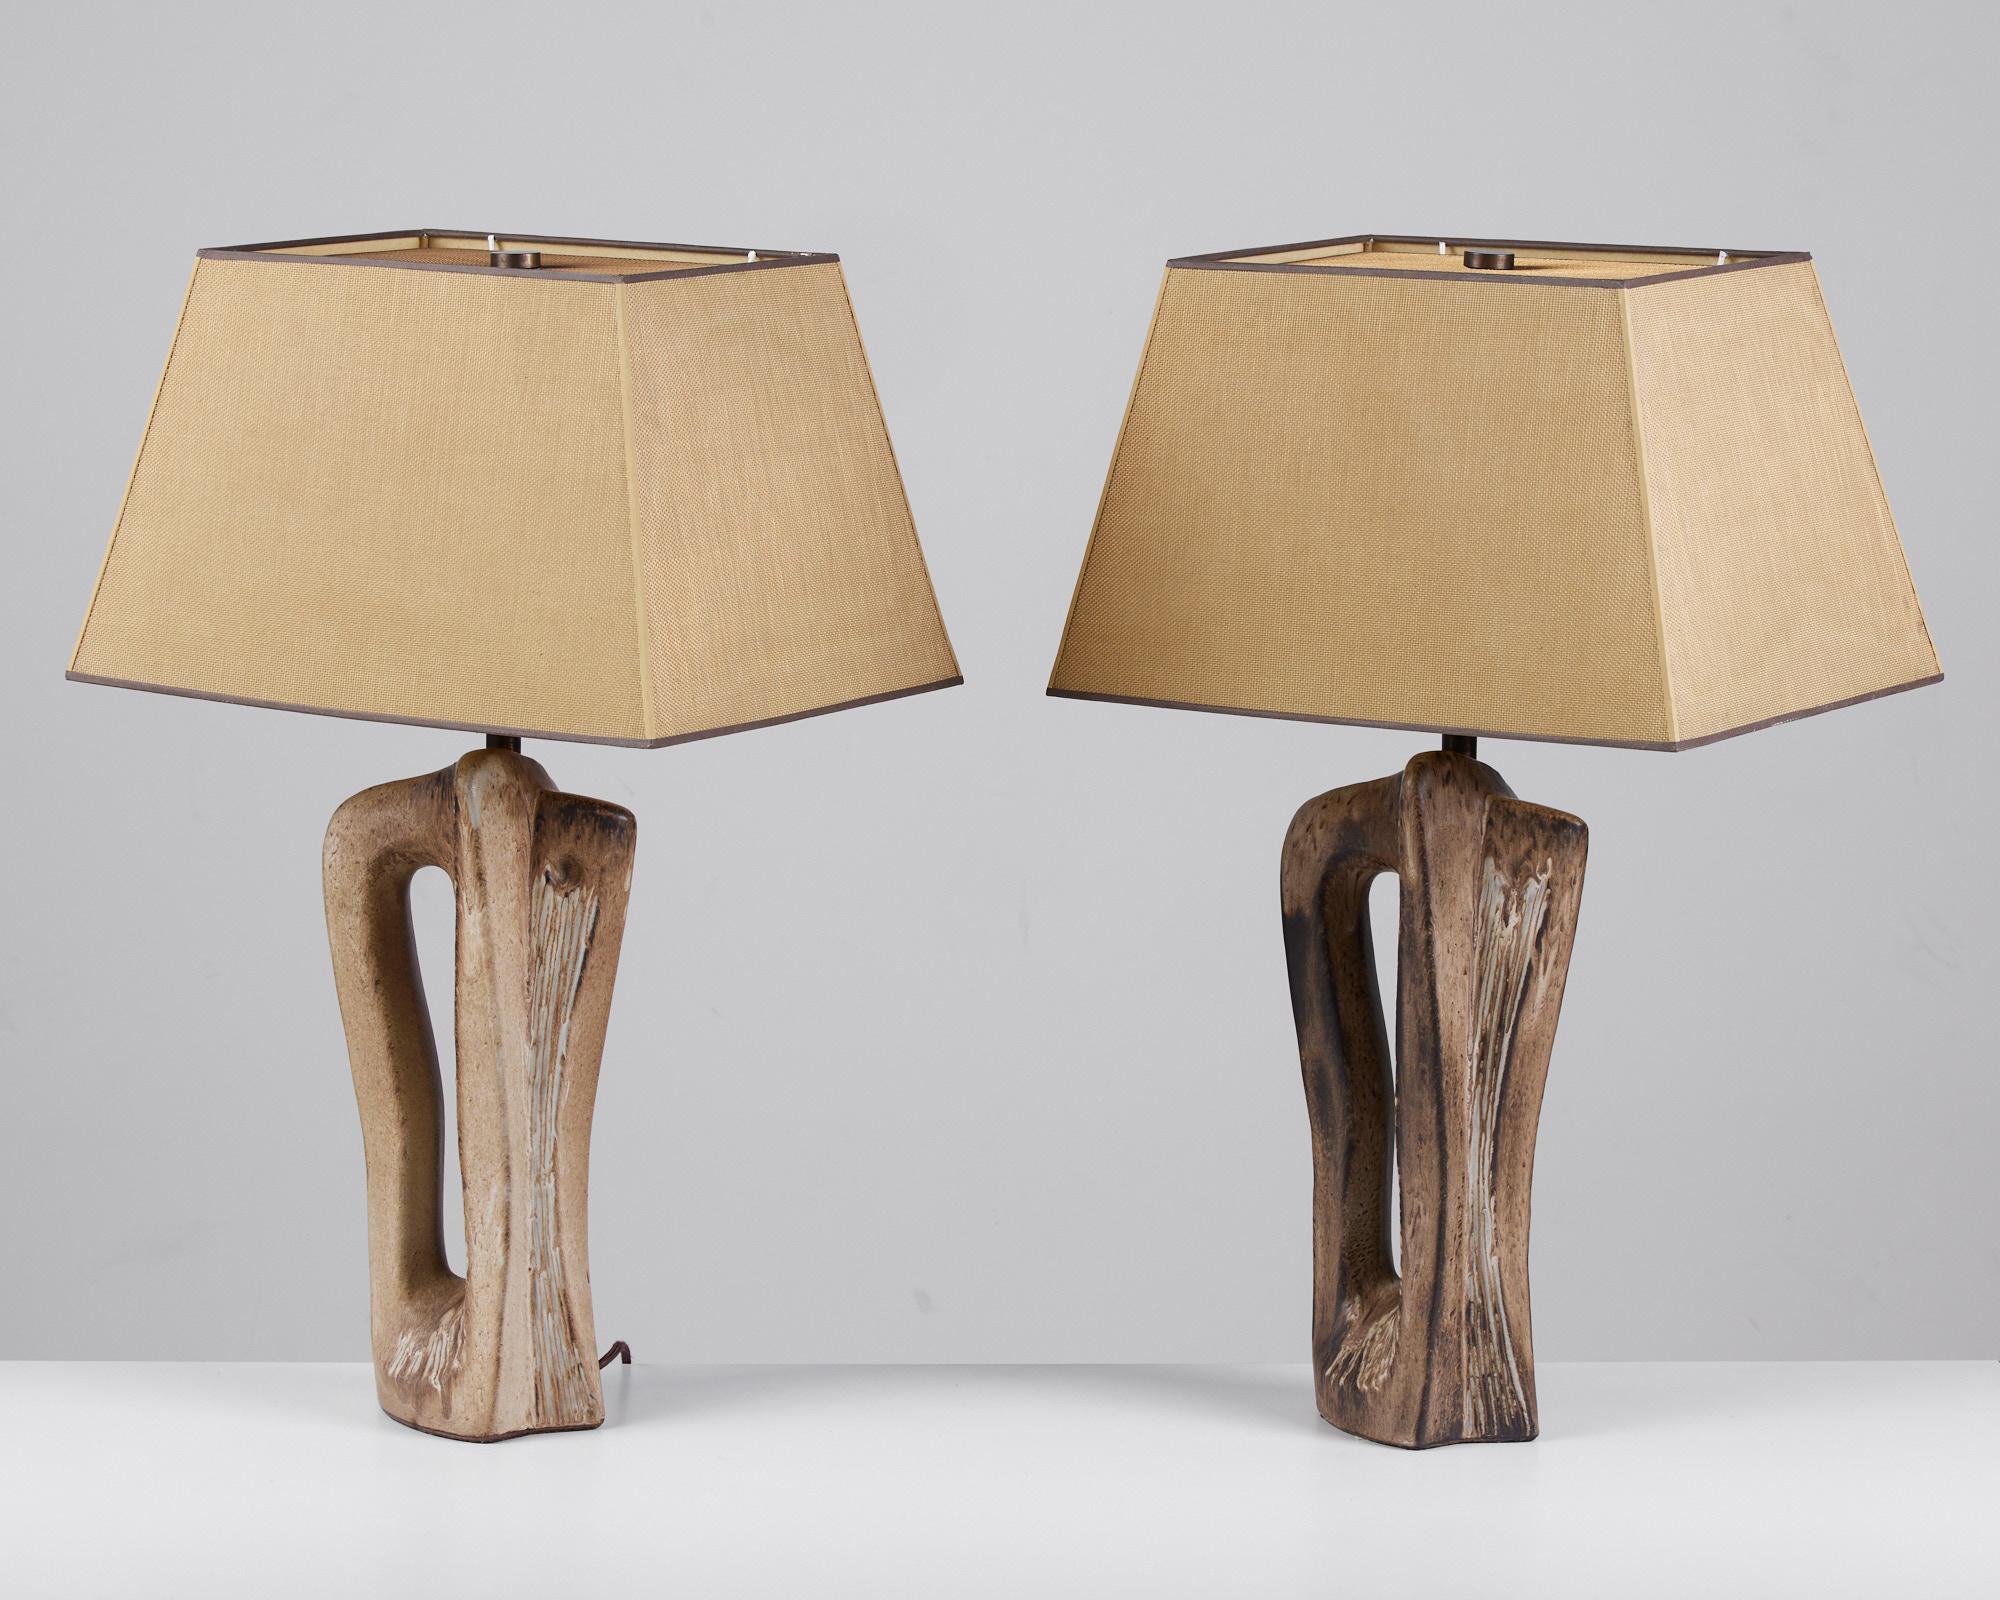 Pair of striking ceramic lamps by German born designer and ceramicist Marianna Von Allesch, c.1950s, USA. These lamps feature an abstract ceramic base with brown and tan glaze. The lamps are finished with custom trapezoidal brass mesh-overlay